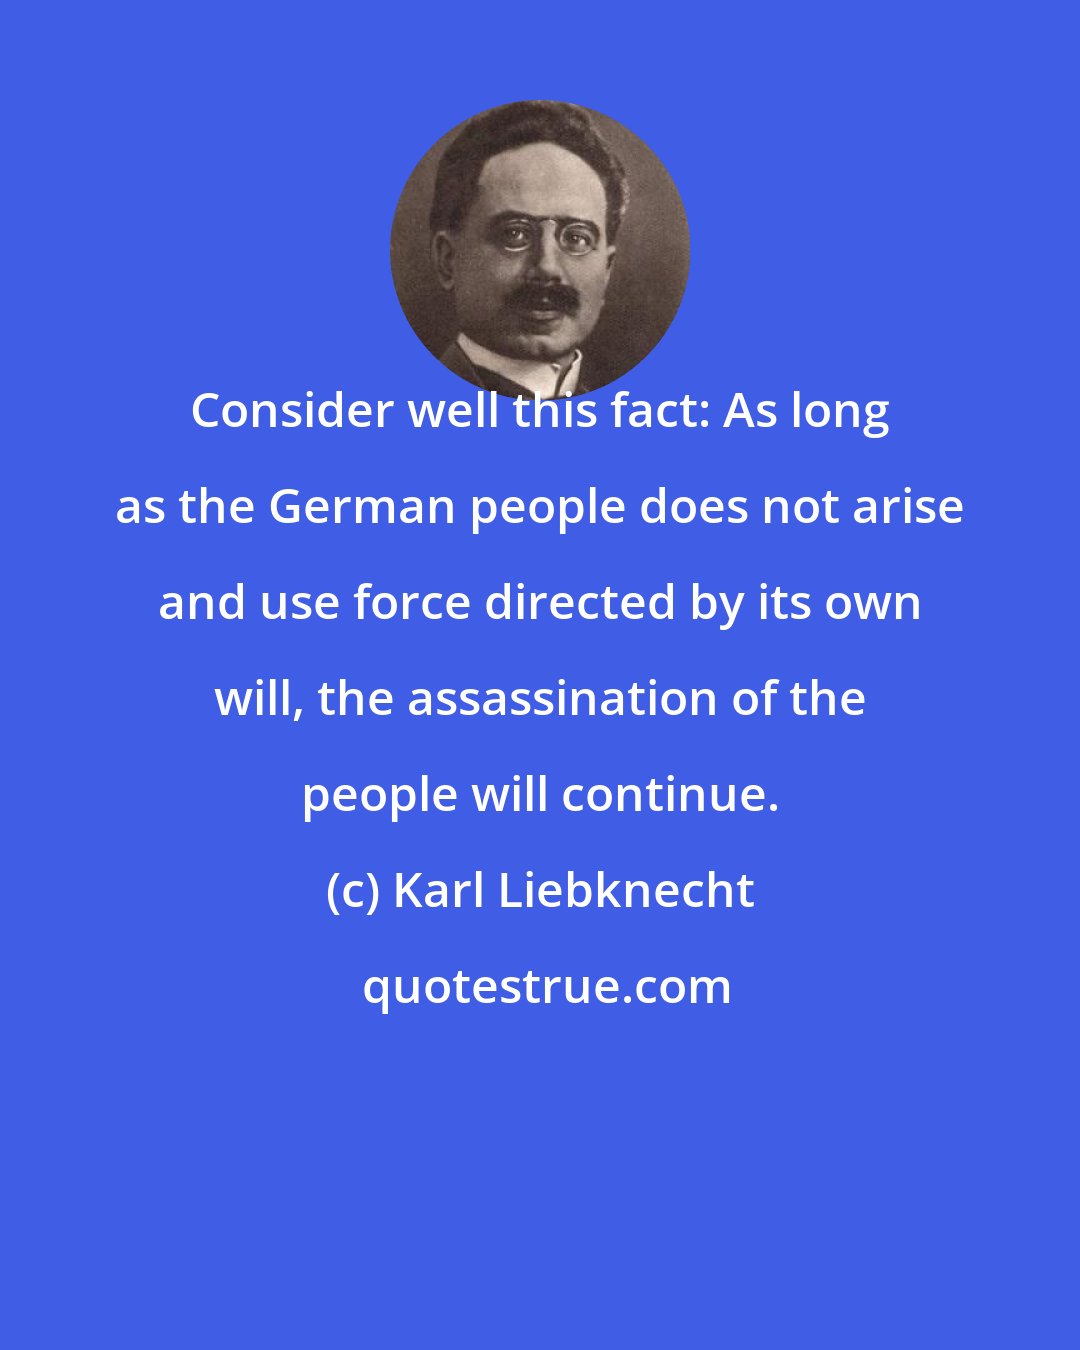 Karl Liebknecht: Consider well this fact: As long as the German people does not arise and use force directed by its own will, the assassination of the people will continue.